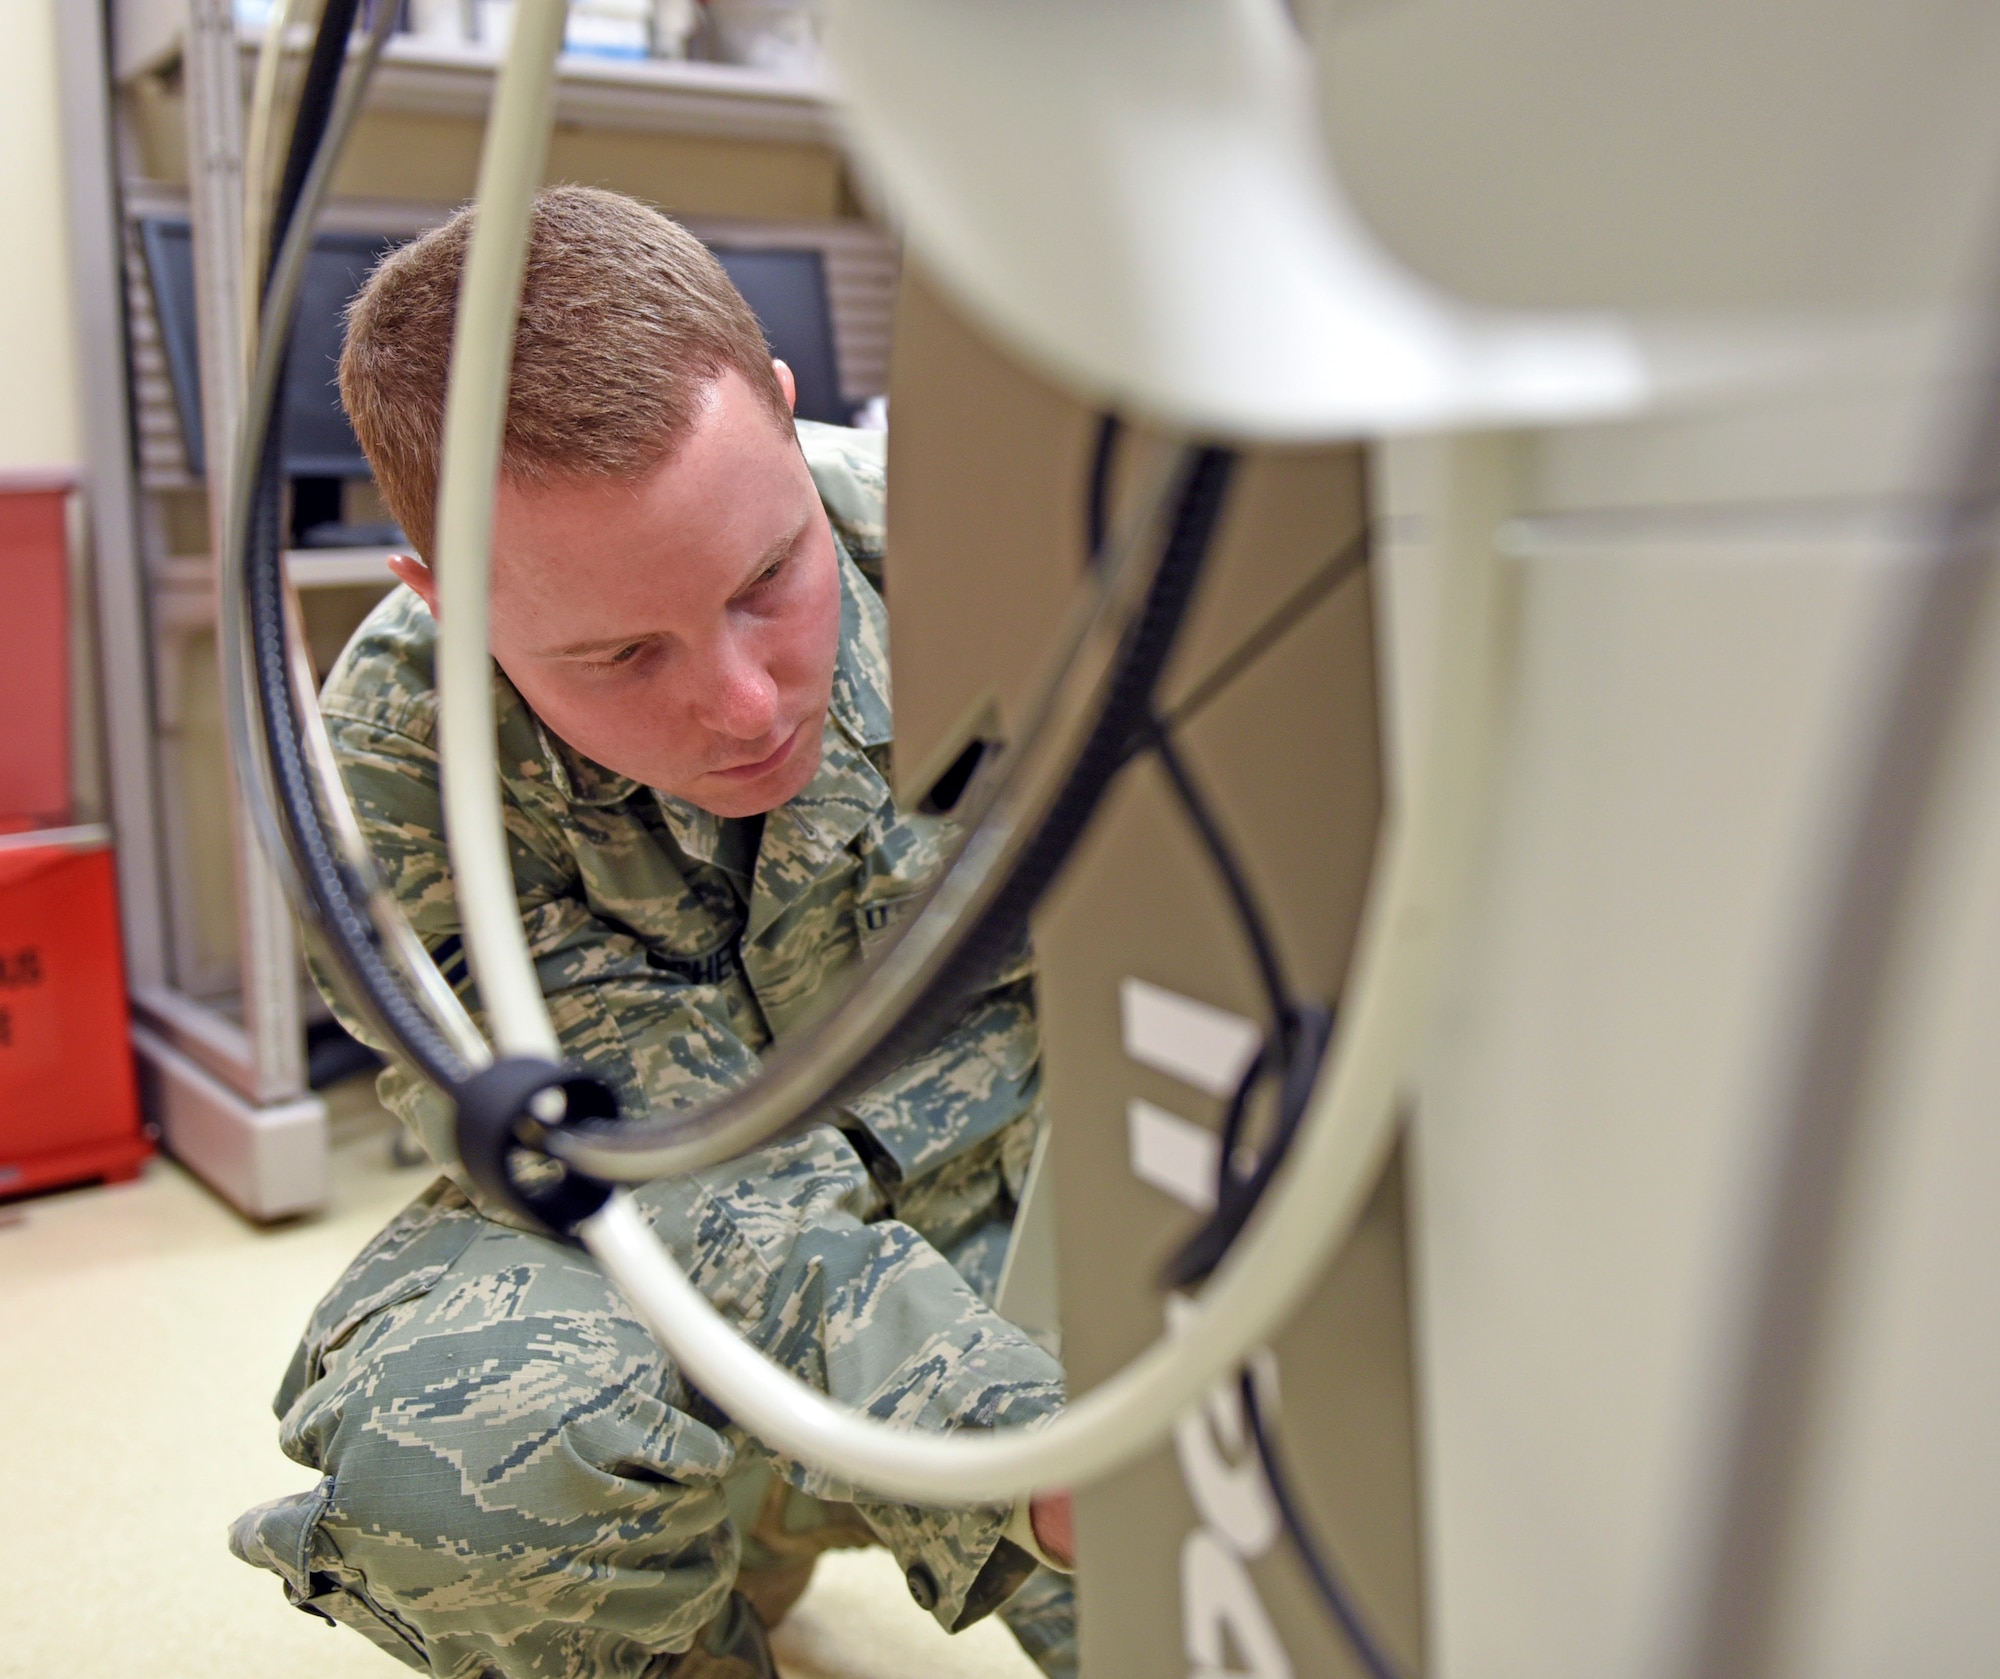 Airman 1st Class Jason McGhee, 375th Medical Support Squadron biomedical equipment technician, repairs a dermatologic laser at the 375th Medical group Clinic, Scott Air Force Base, Ill. Jan. 11, 2019. As a member of the 375th Medical Equipment Repair Center, McGhee ensures vital equipment including patient movement items such as ventilators, infant incubators, life support units, defibrillators and patient monitors are calibrated and properly set up.(Air Force photo by Airman 1st Class Chad Gorecki)